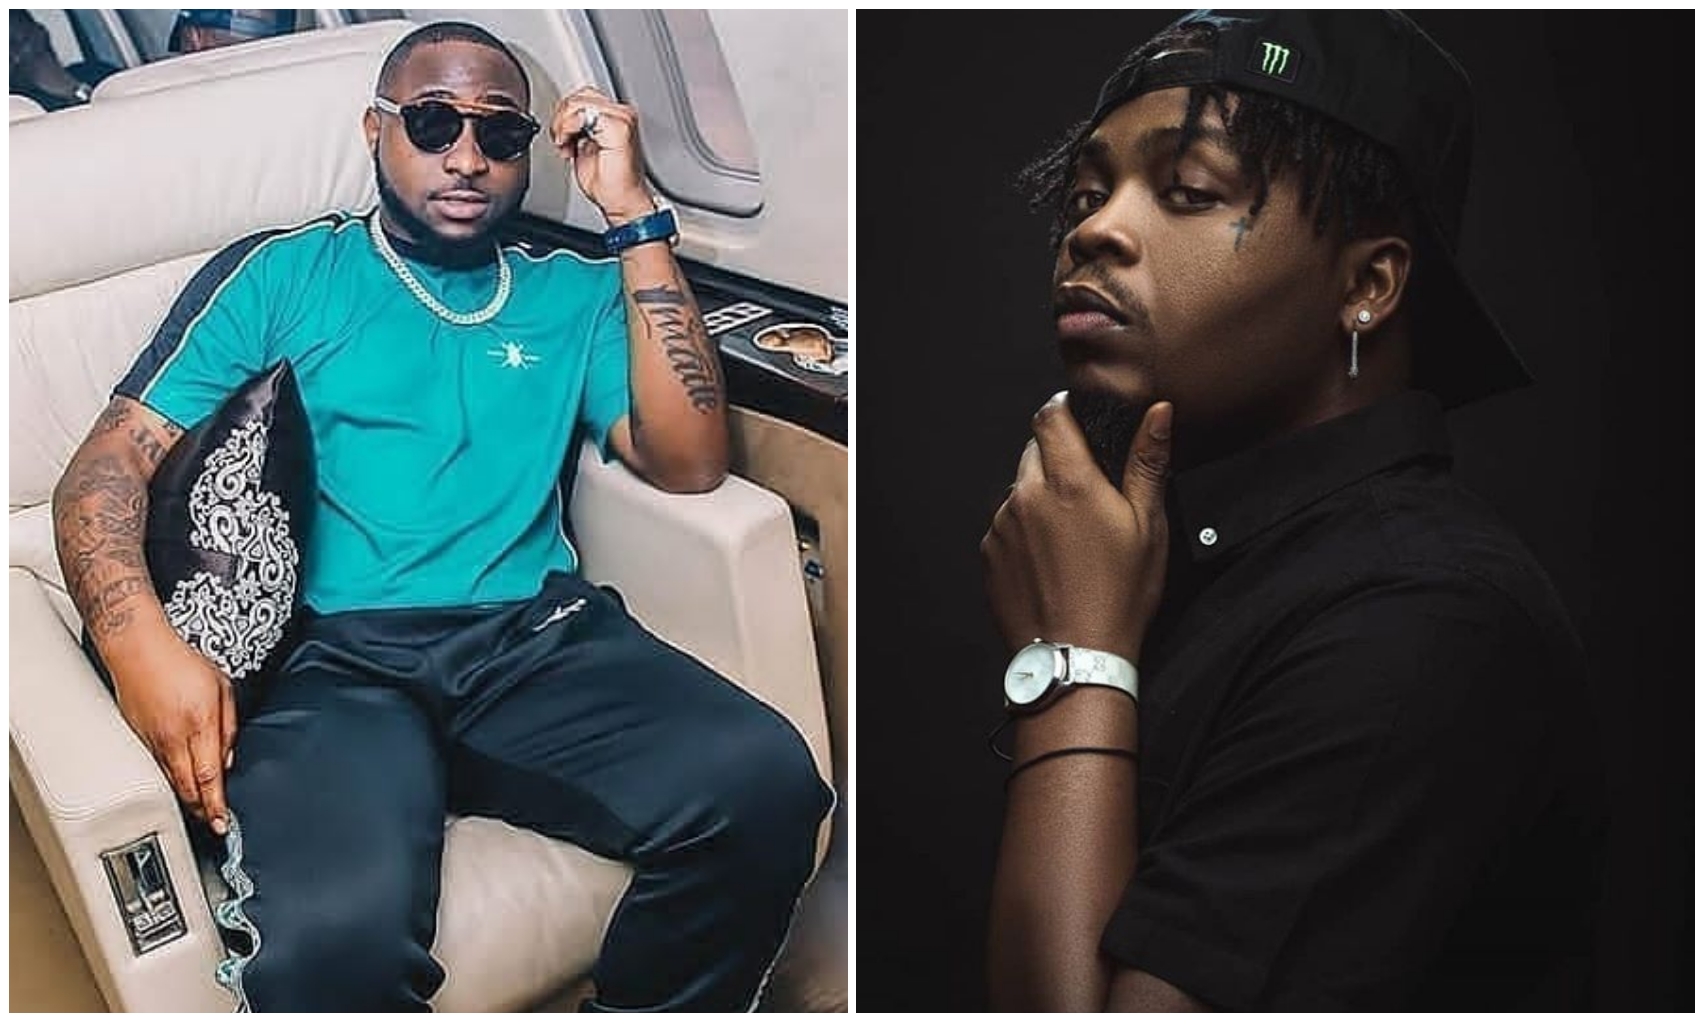 “Davido’s FALL is bigger than Olamide’s music career and the whole YBNL” - Angry Fan says